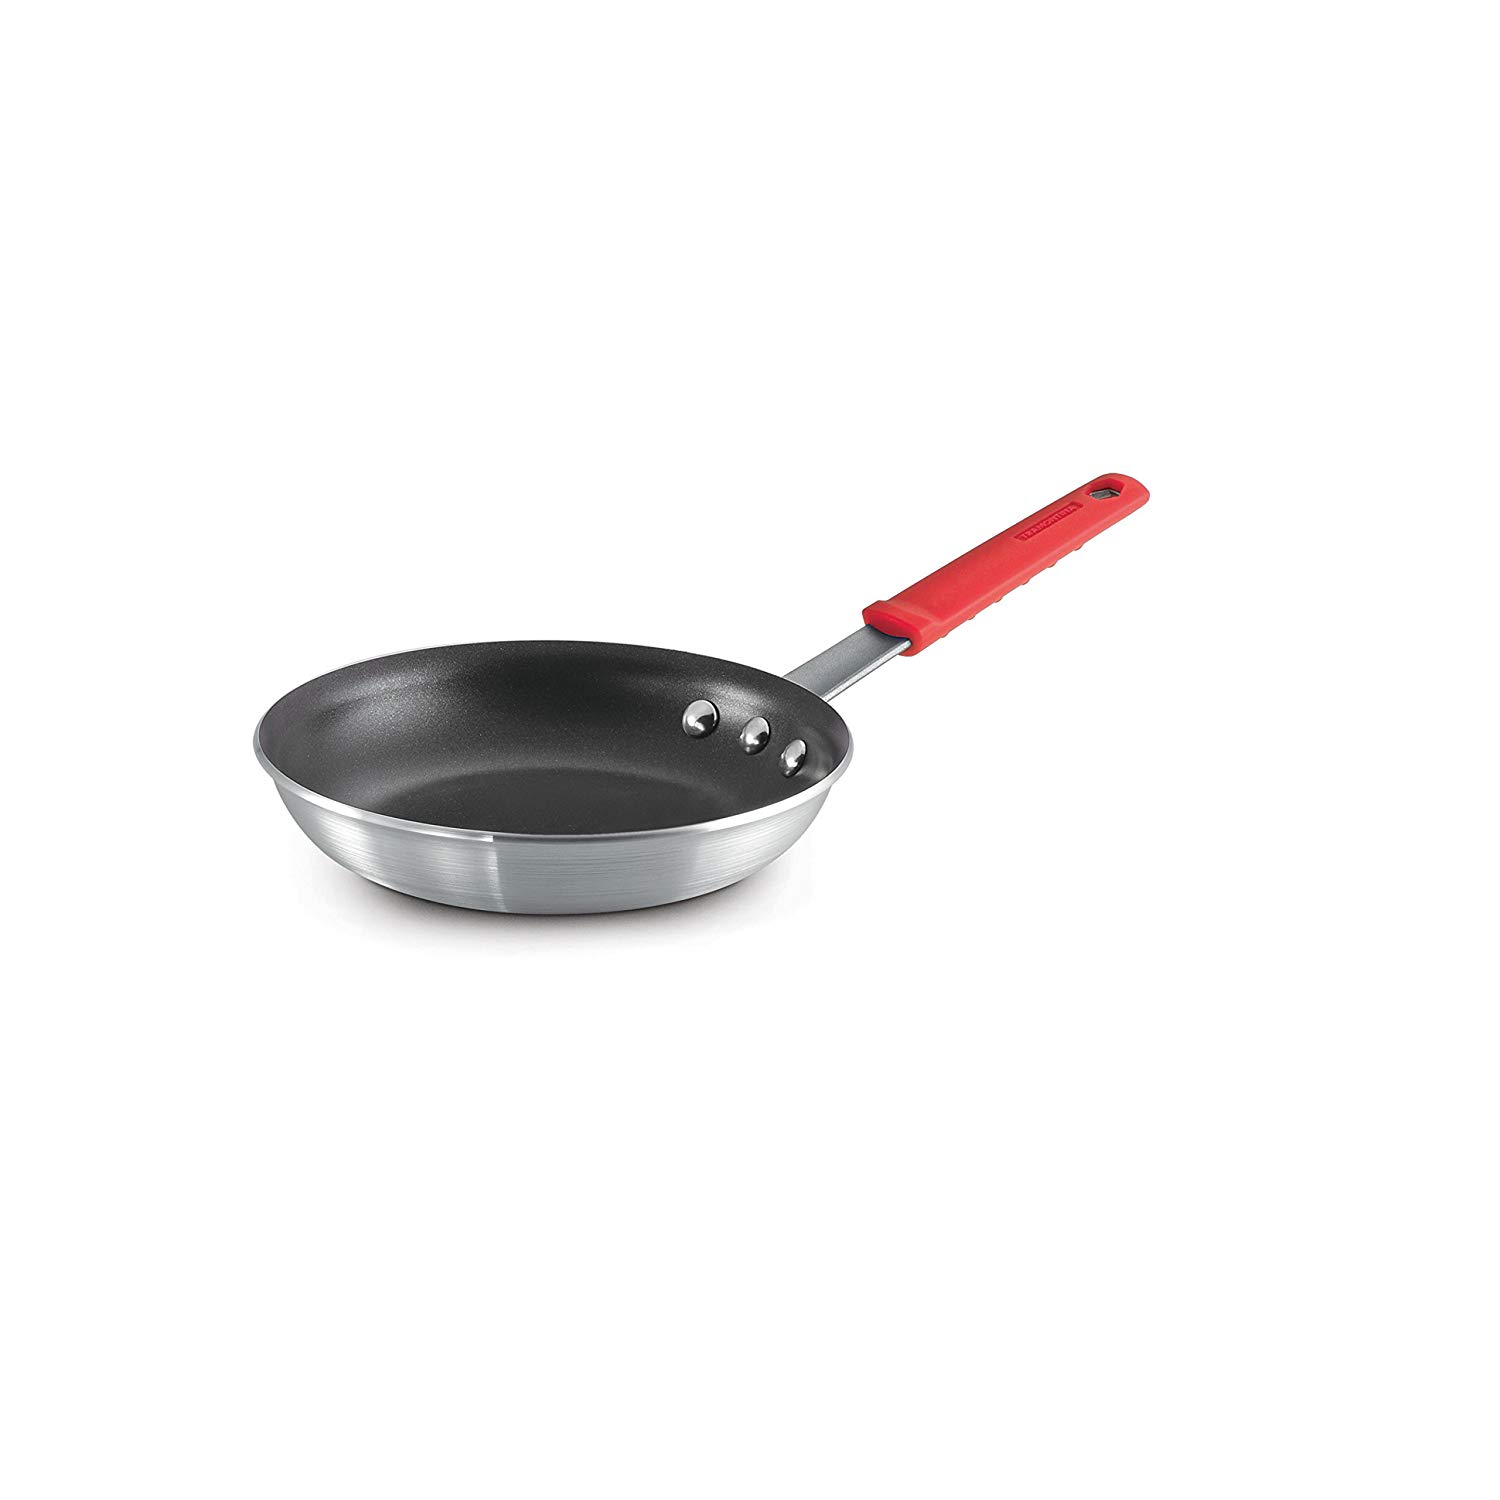 Tramontina Nonstick Omelette Pan, 8-Inch